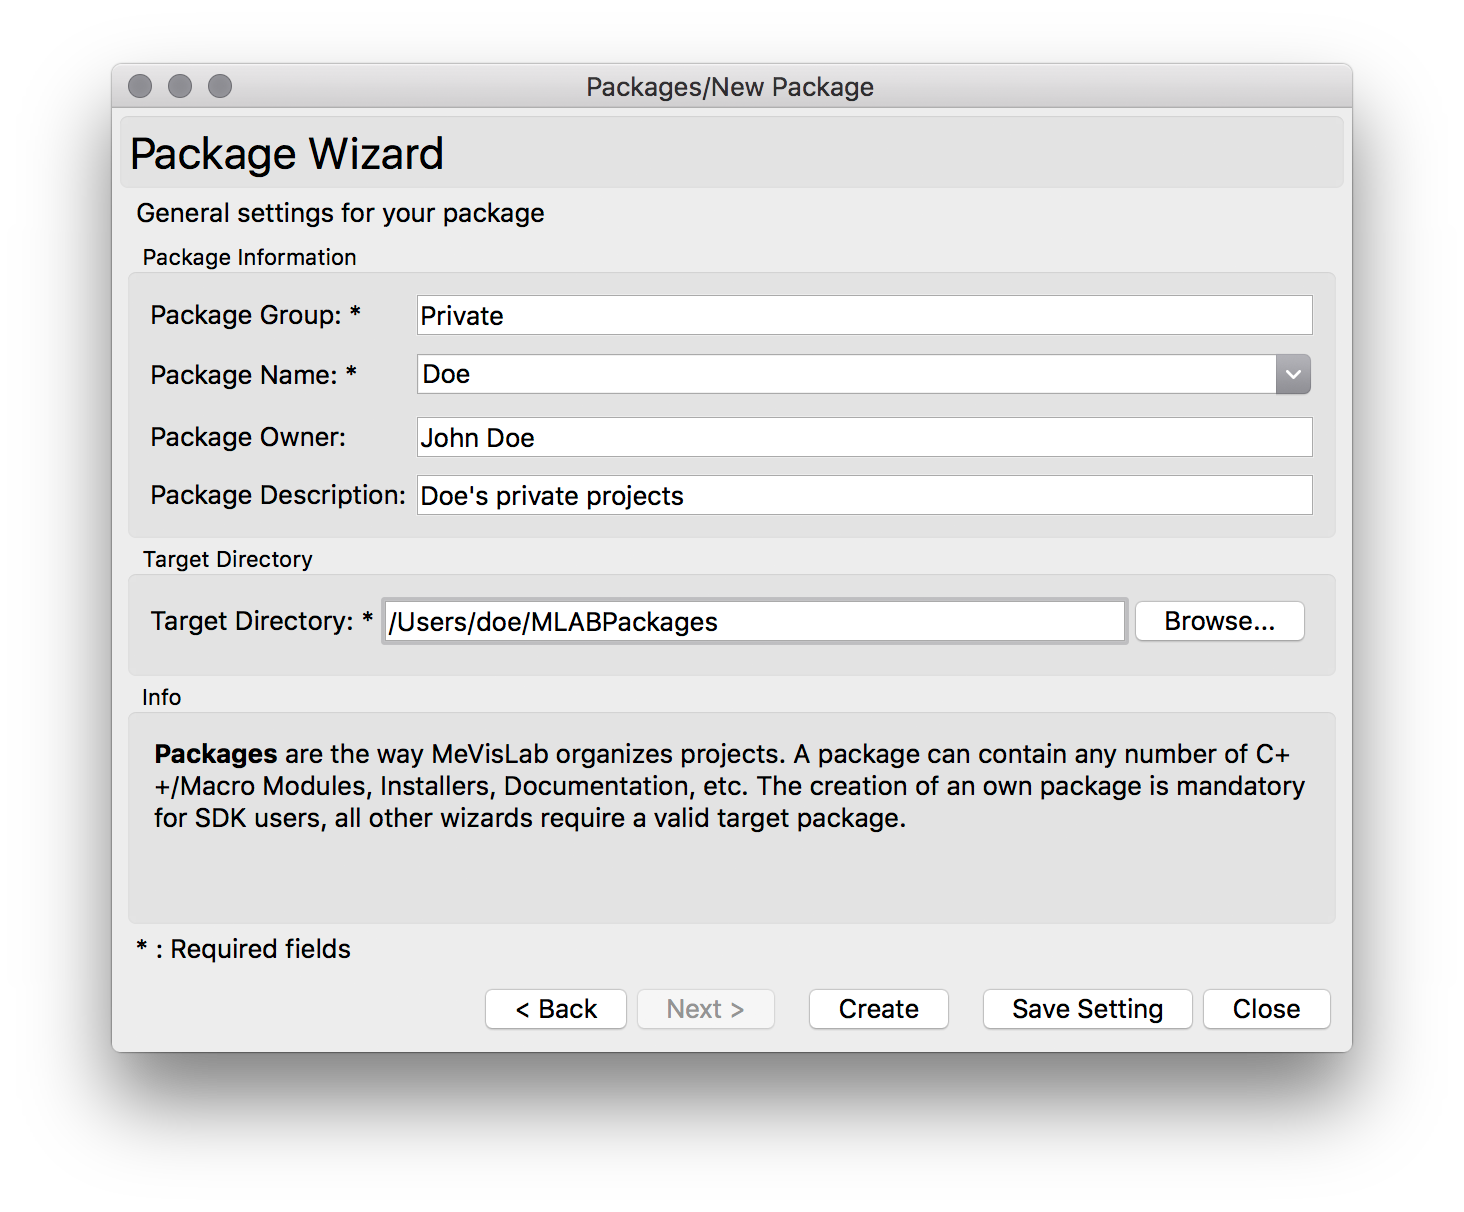 Setup of a new package using the package wizard